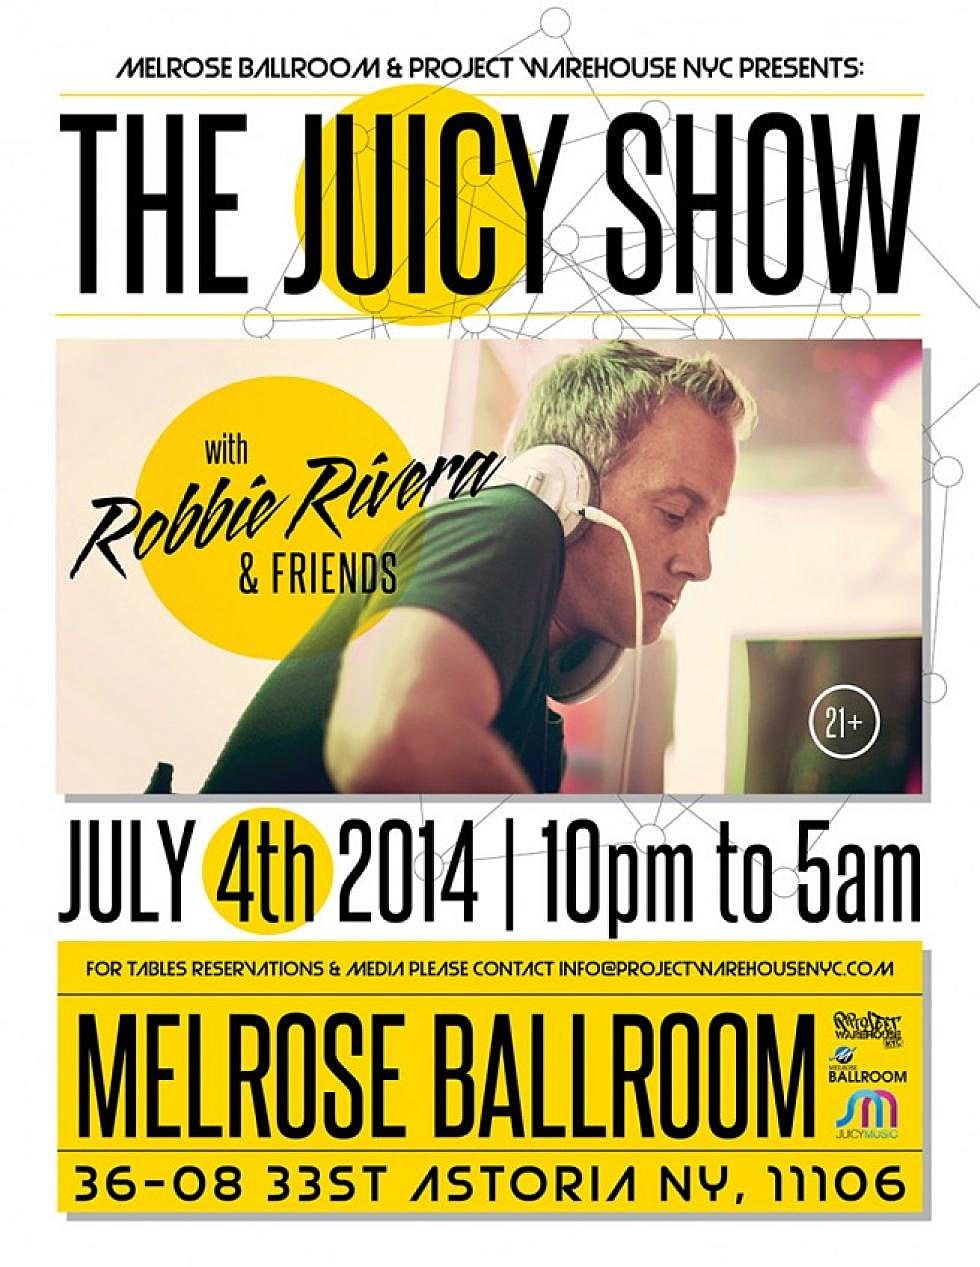 Project Warehouse NYC to host the Juicy Show with Robbie Rivera, July 4th!